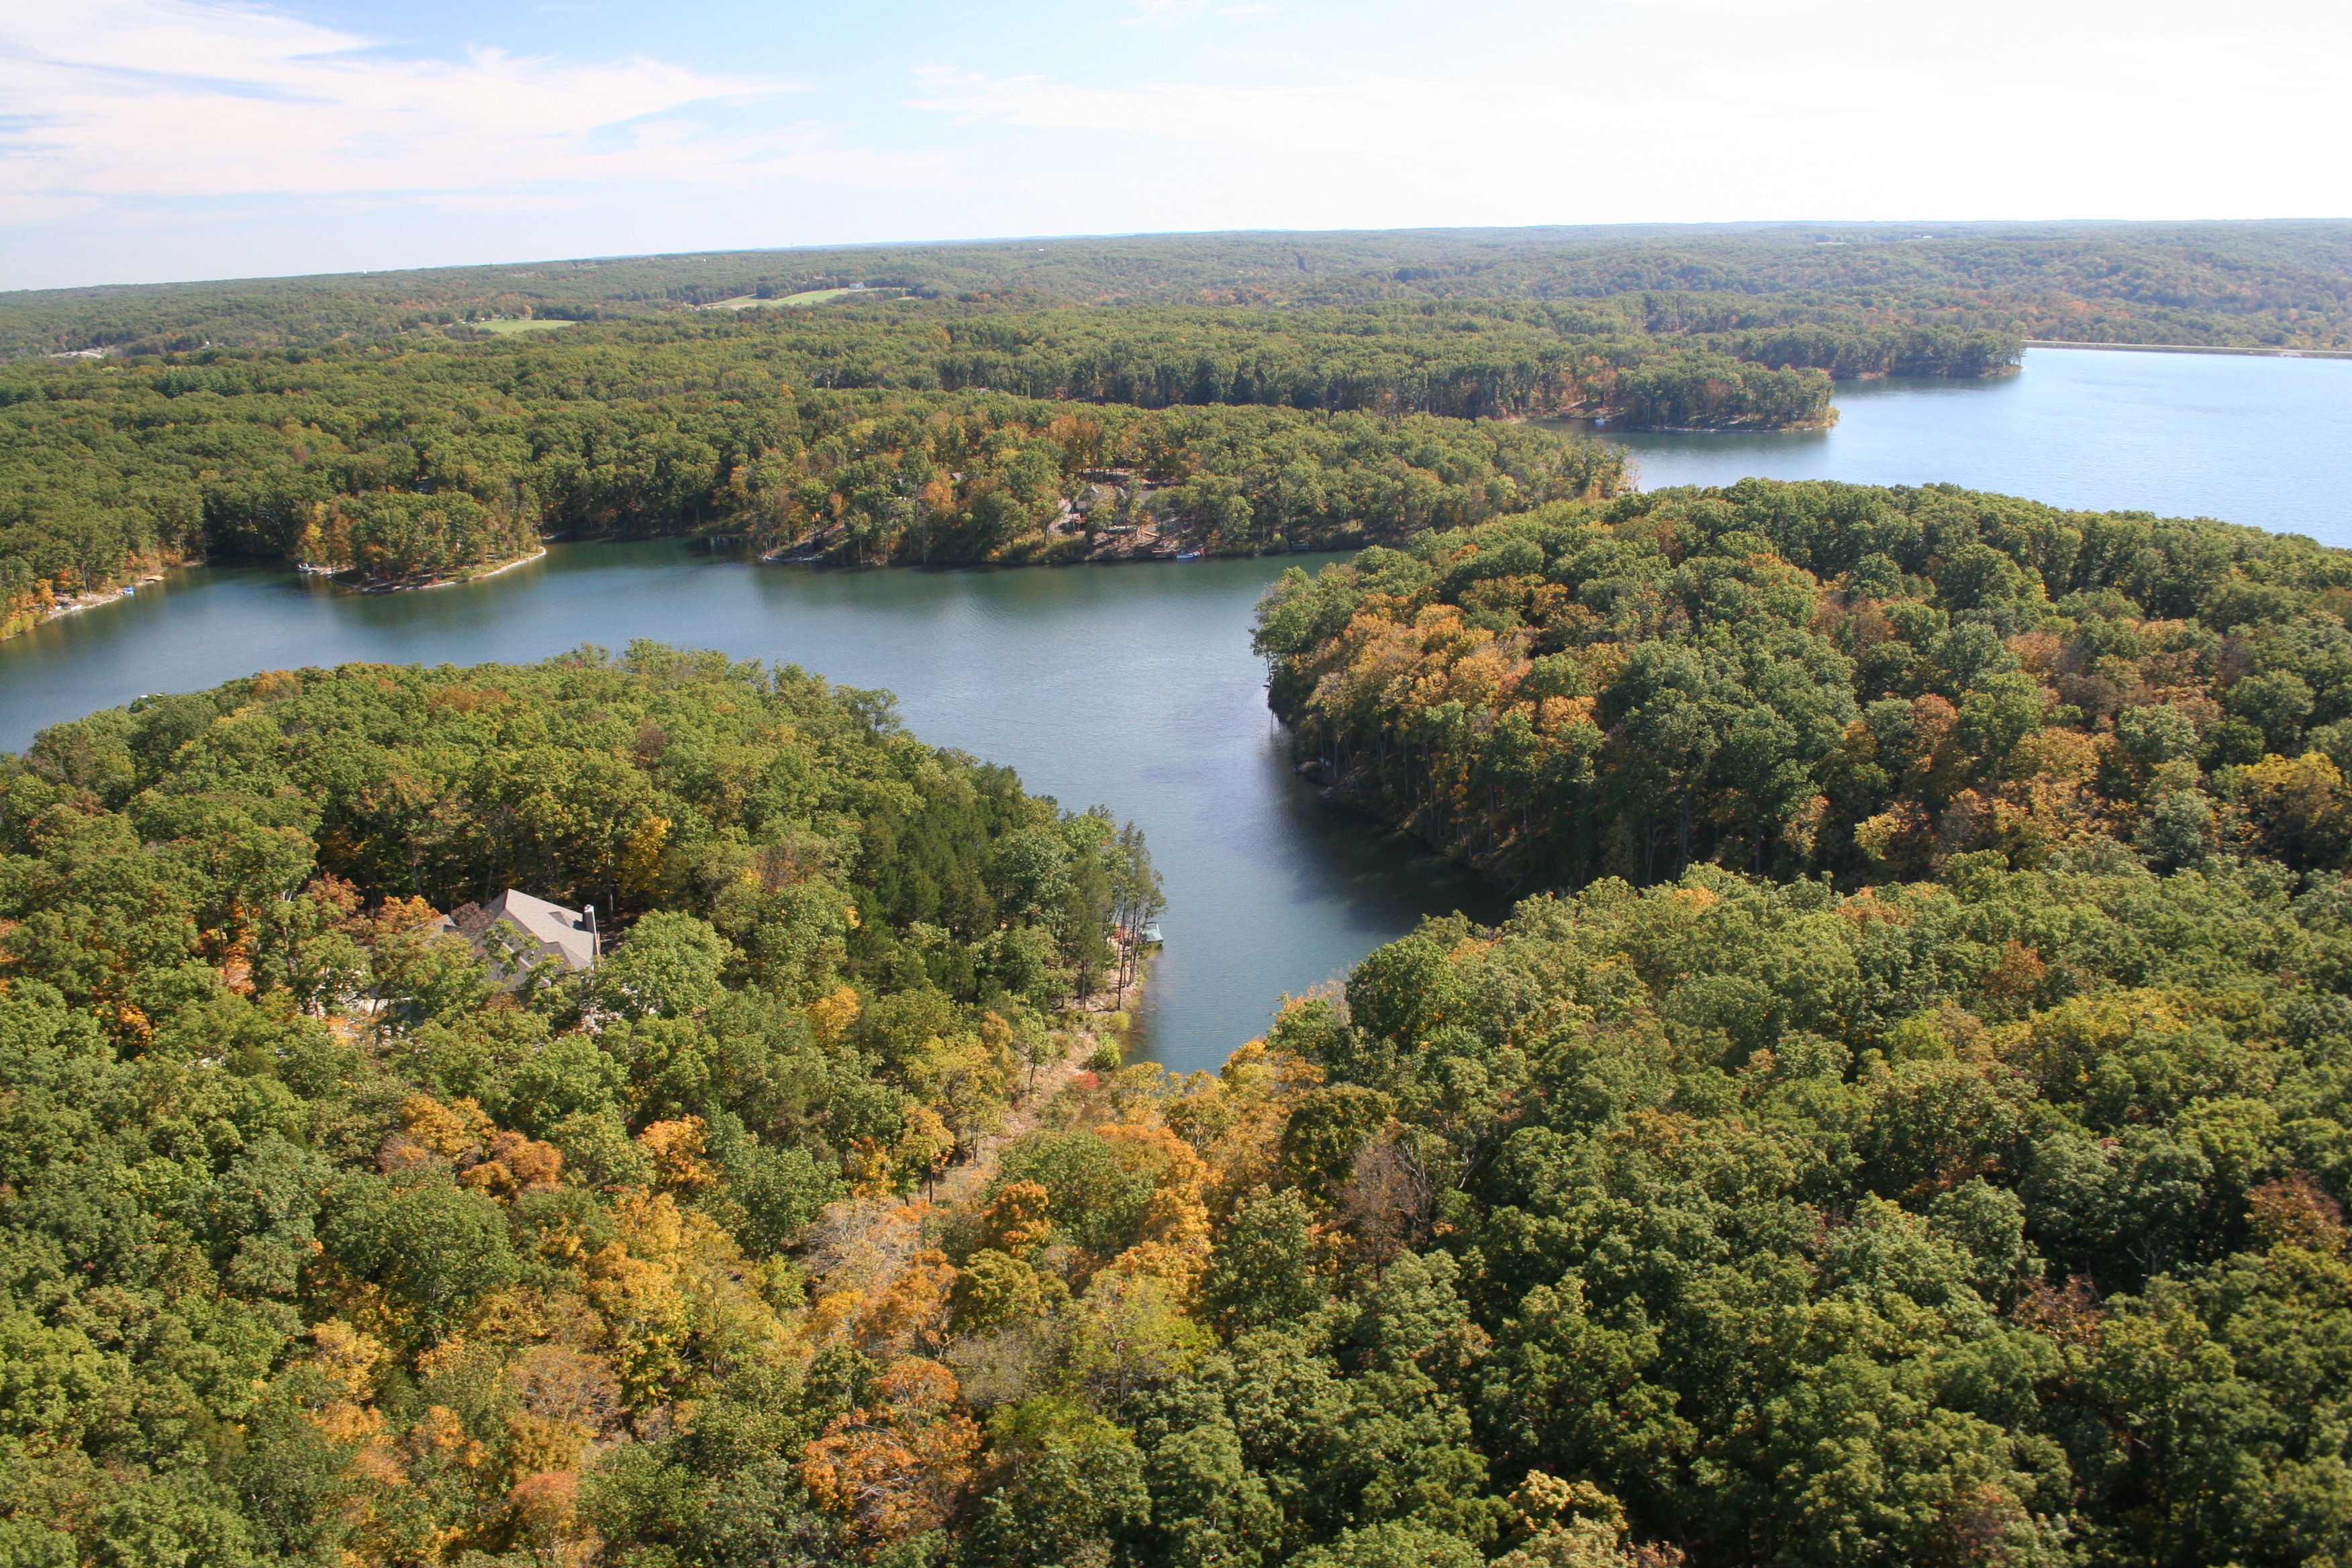 The largest of Innsbrook's more than 100 lakes, 236-acre Alpine Lake.